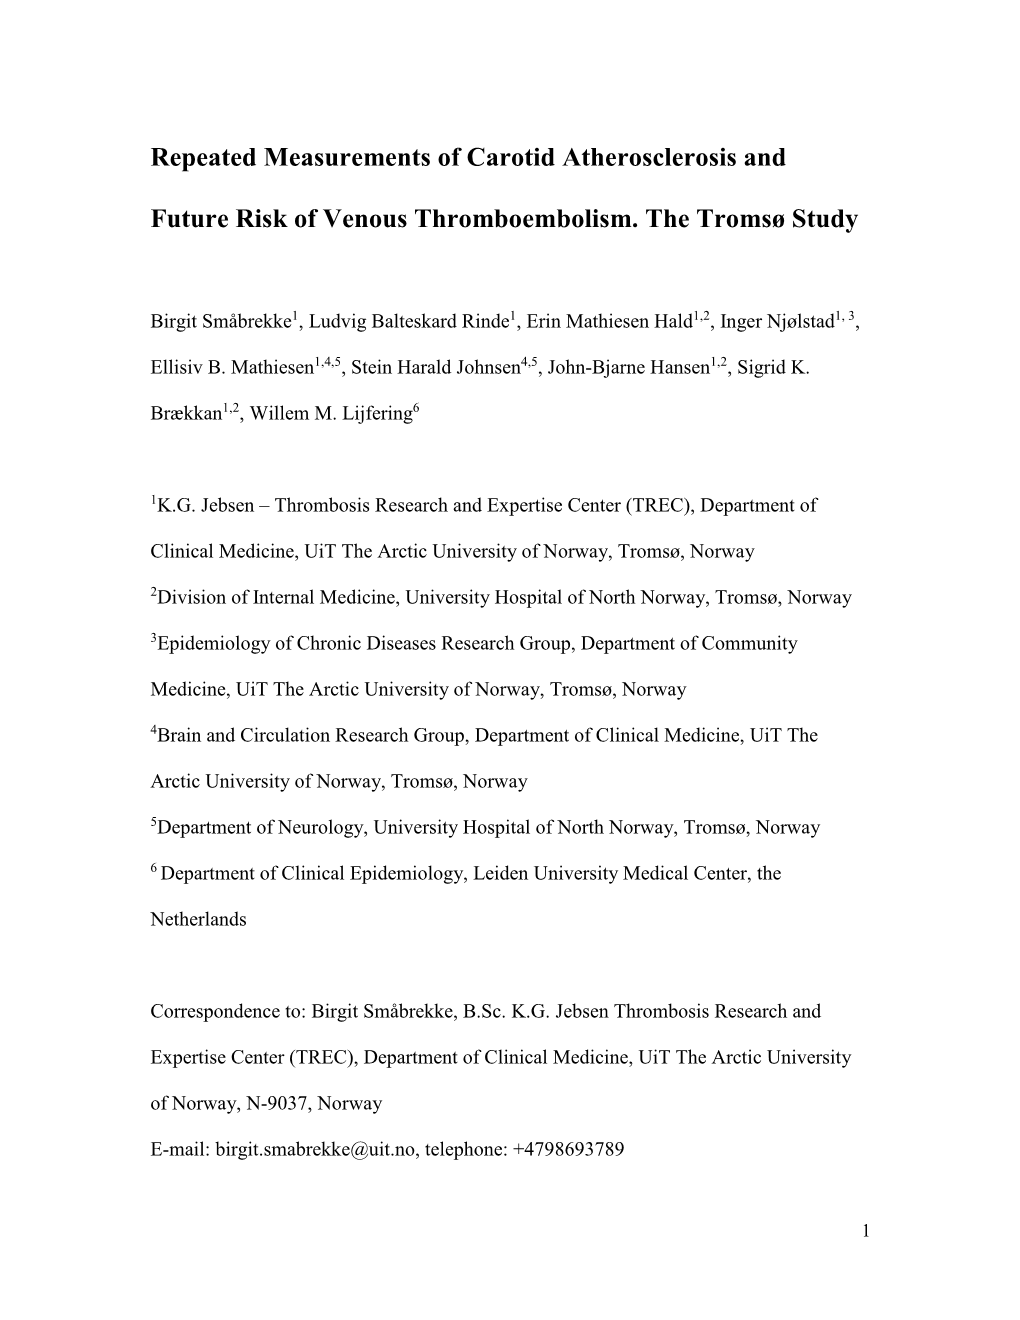 Repeated Measurements of Carotid Atherosclerosis and Future Risk of Venous Thromboembolism. the Tromsø Study